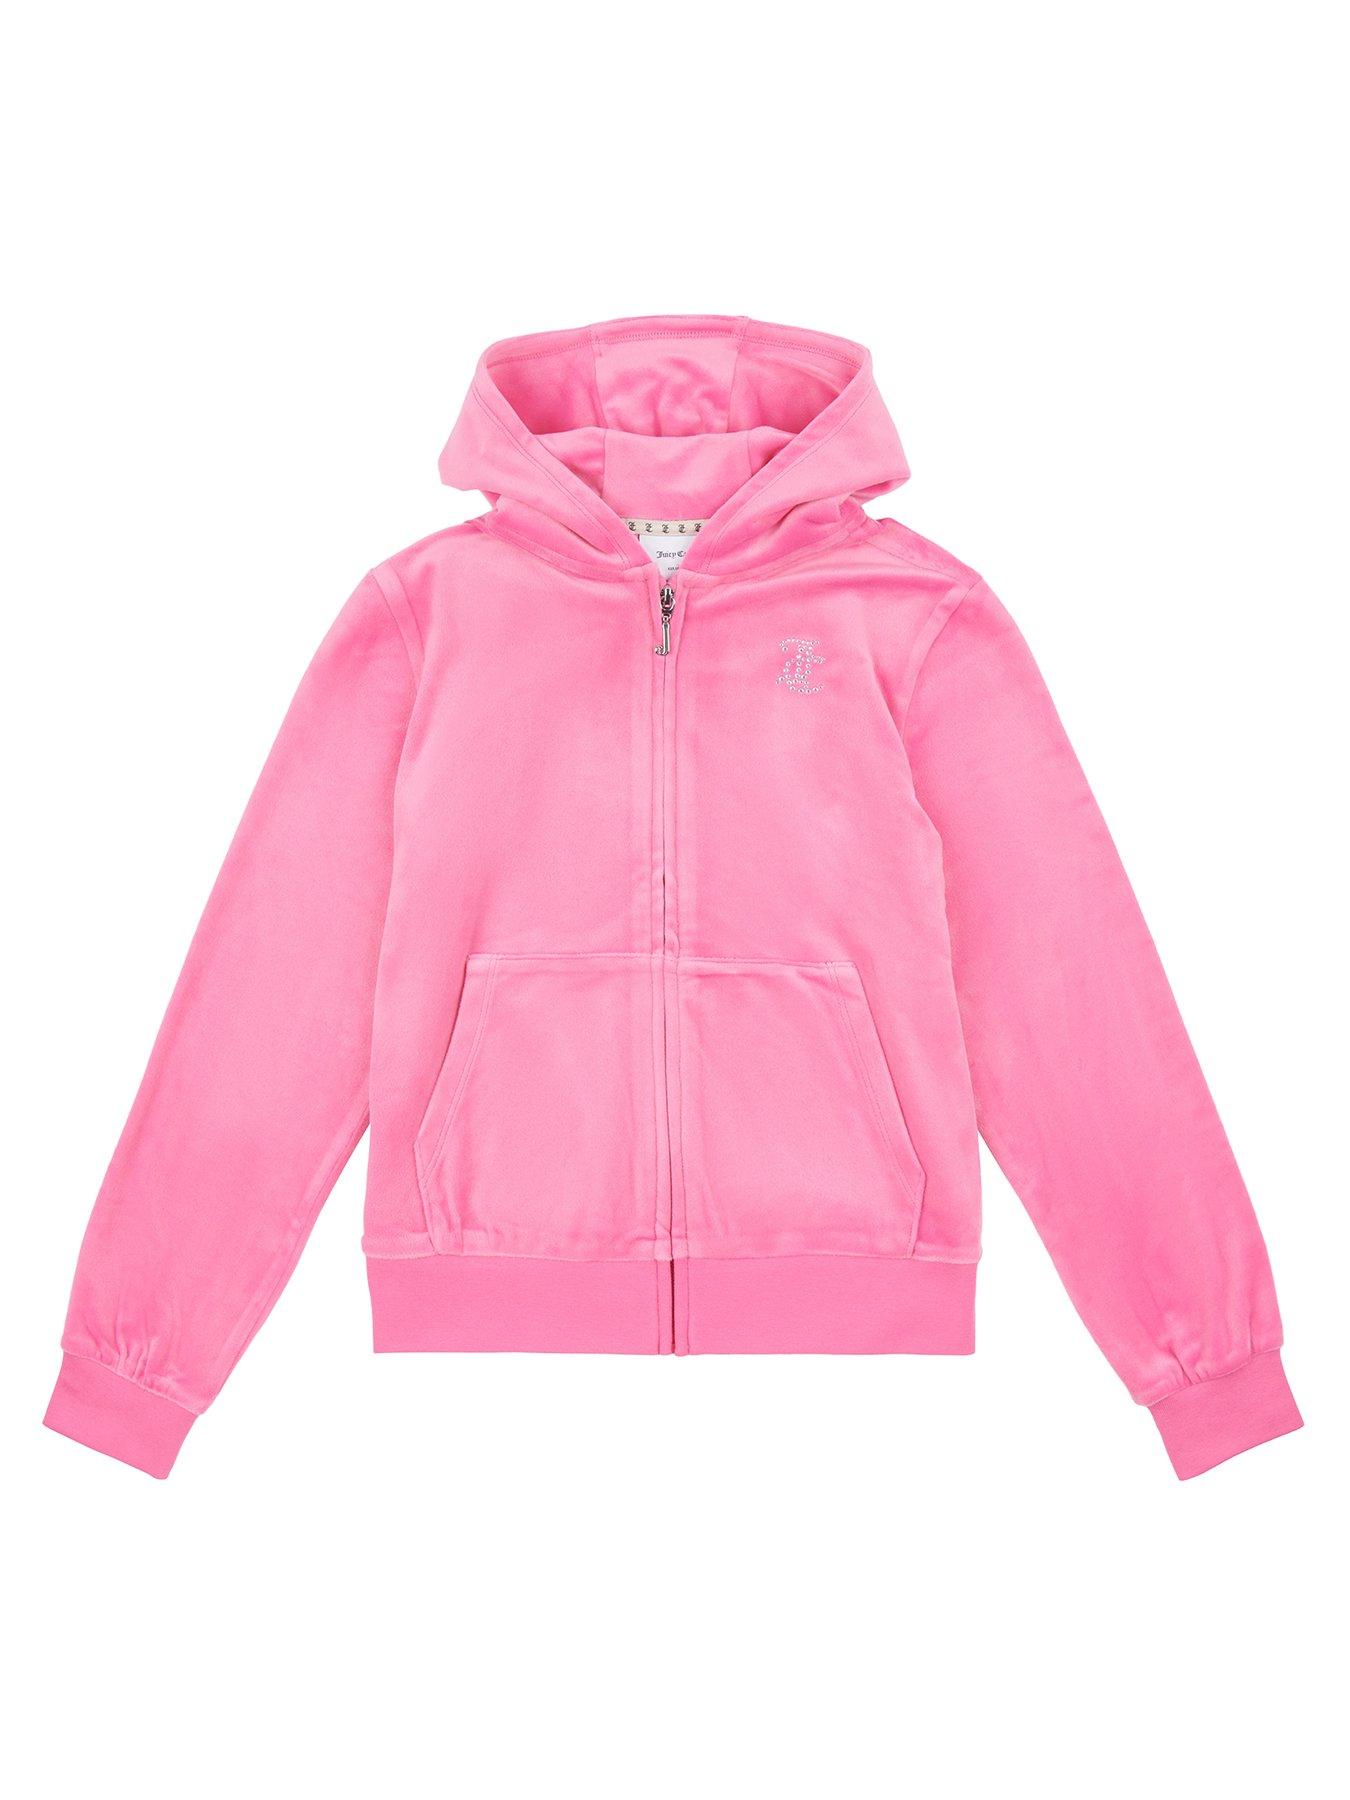 Juicy Couture Light Pink Logo Velour Tracksuit Set - Small Hoodie And Pants